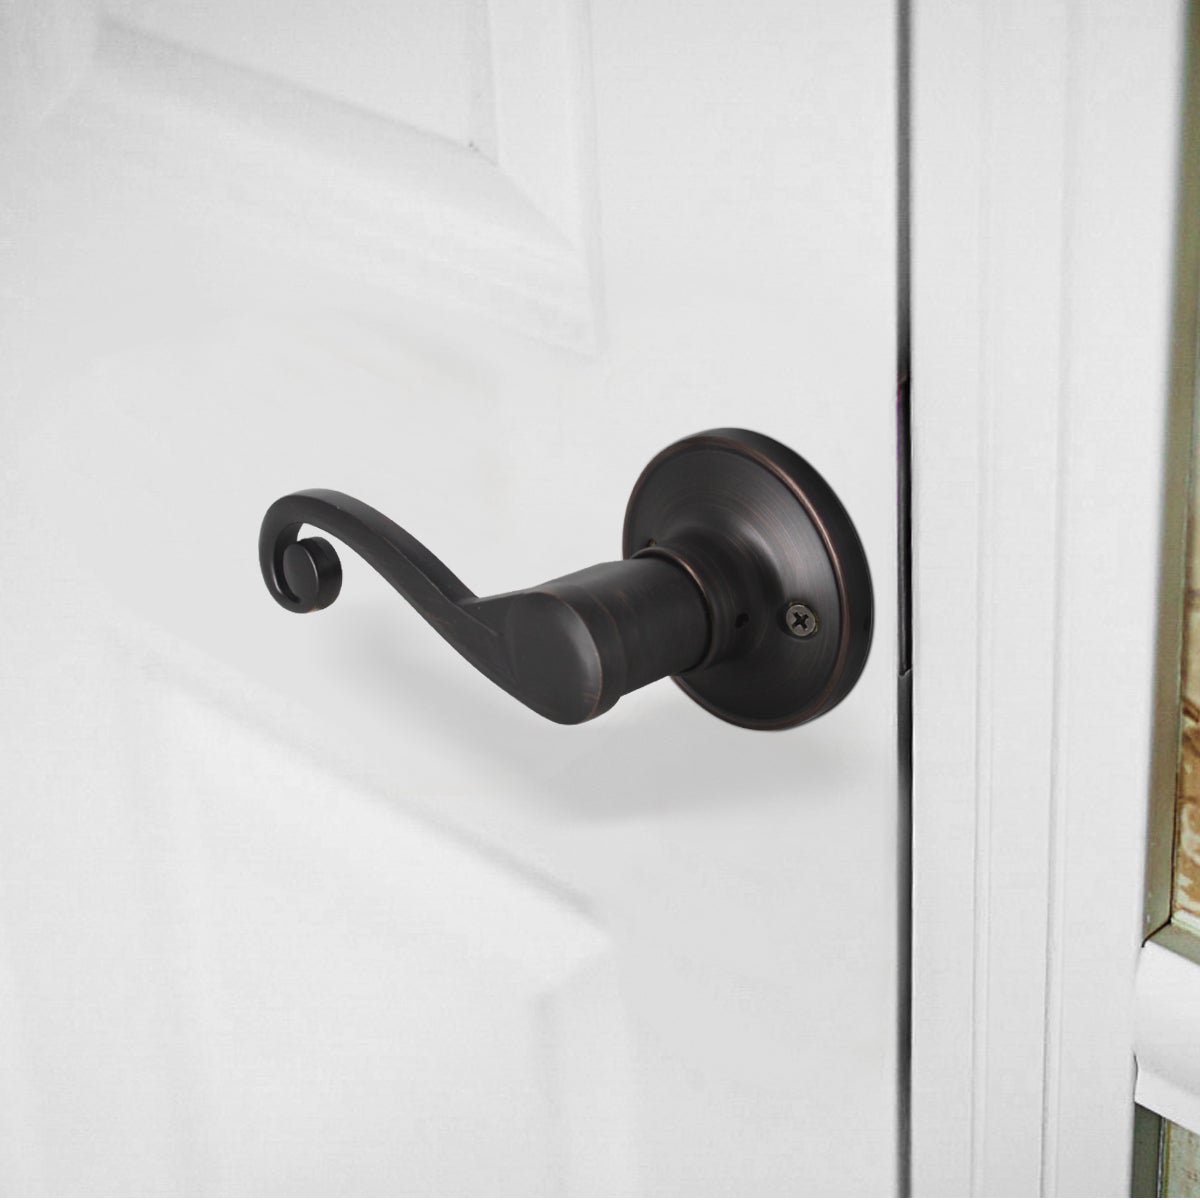 Probrico Passage Closet and Hall Door Levers Lock Oil Rubbed Bronze Finish 10 Packs